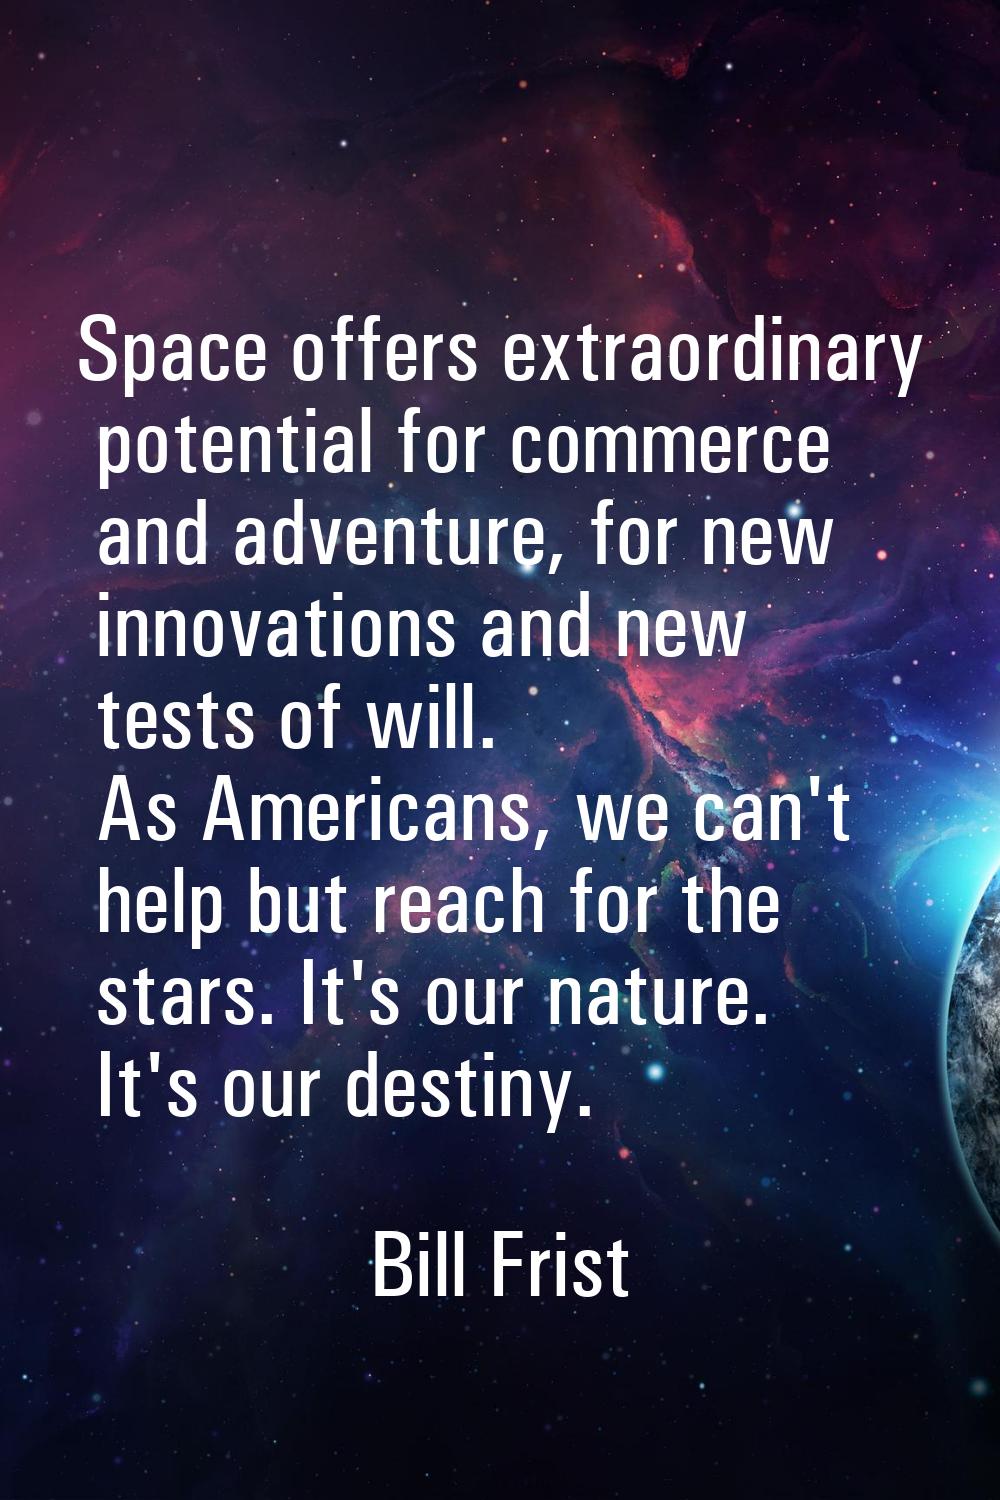 Space offers extraordinary potential for commerce and adventure, for new innovations and new tests 